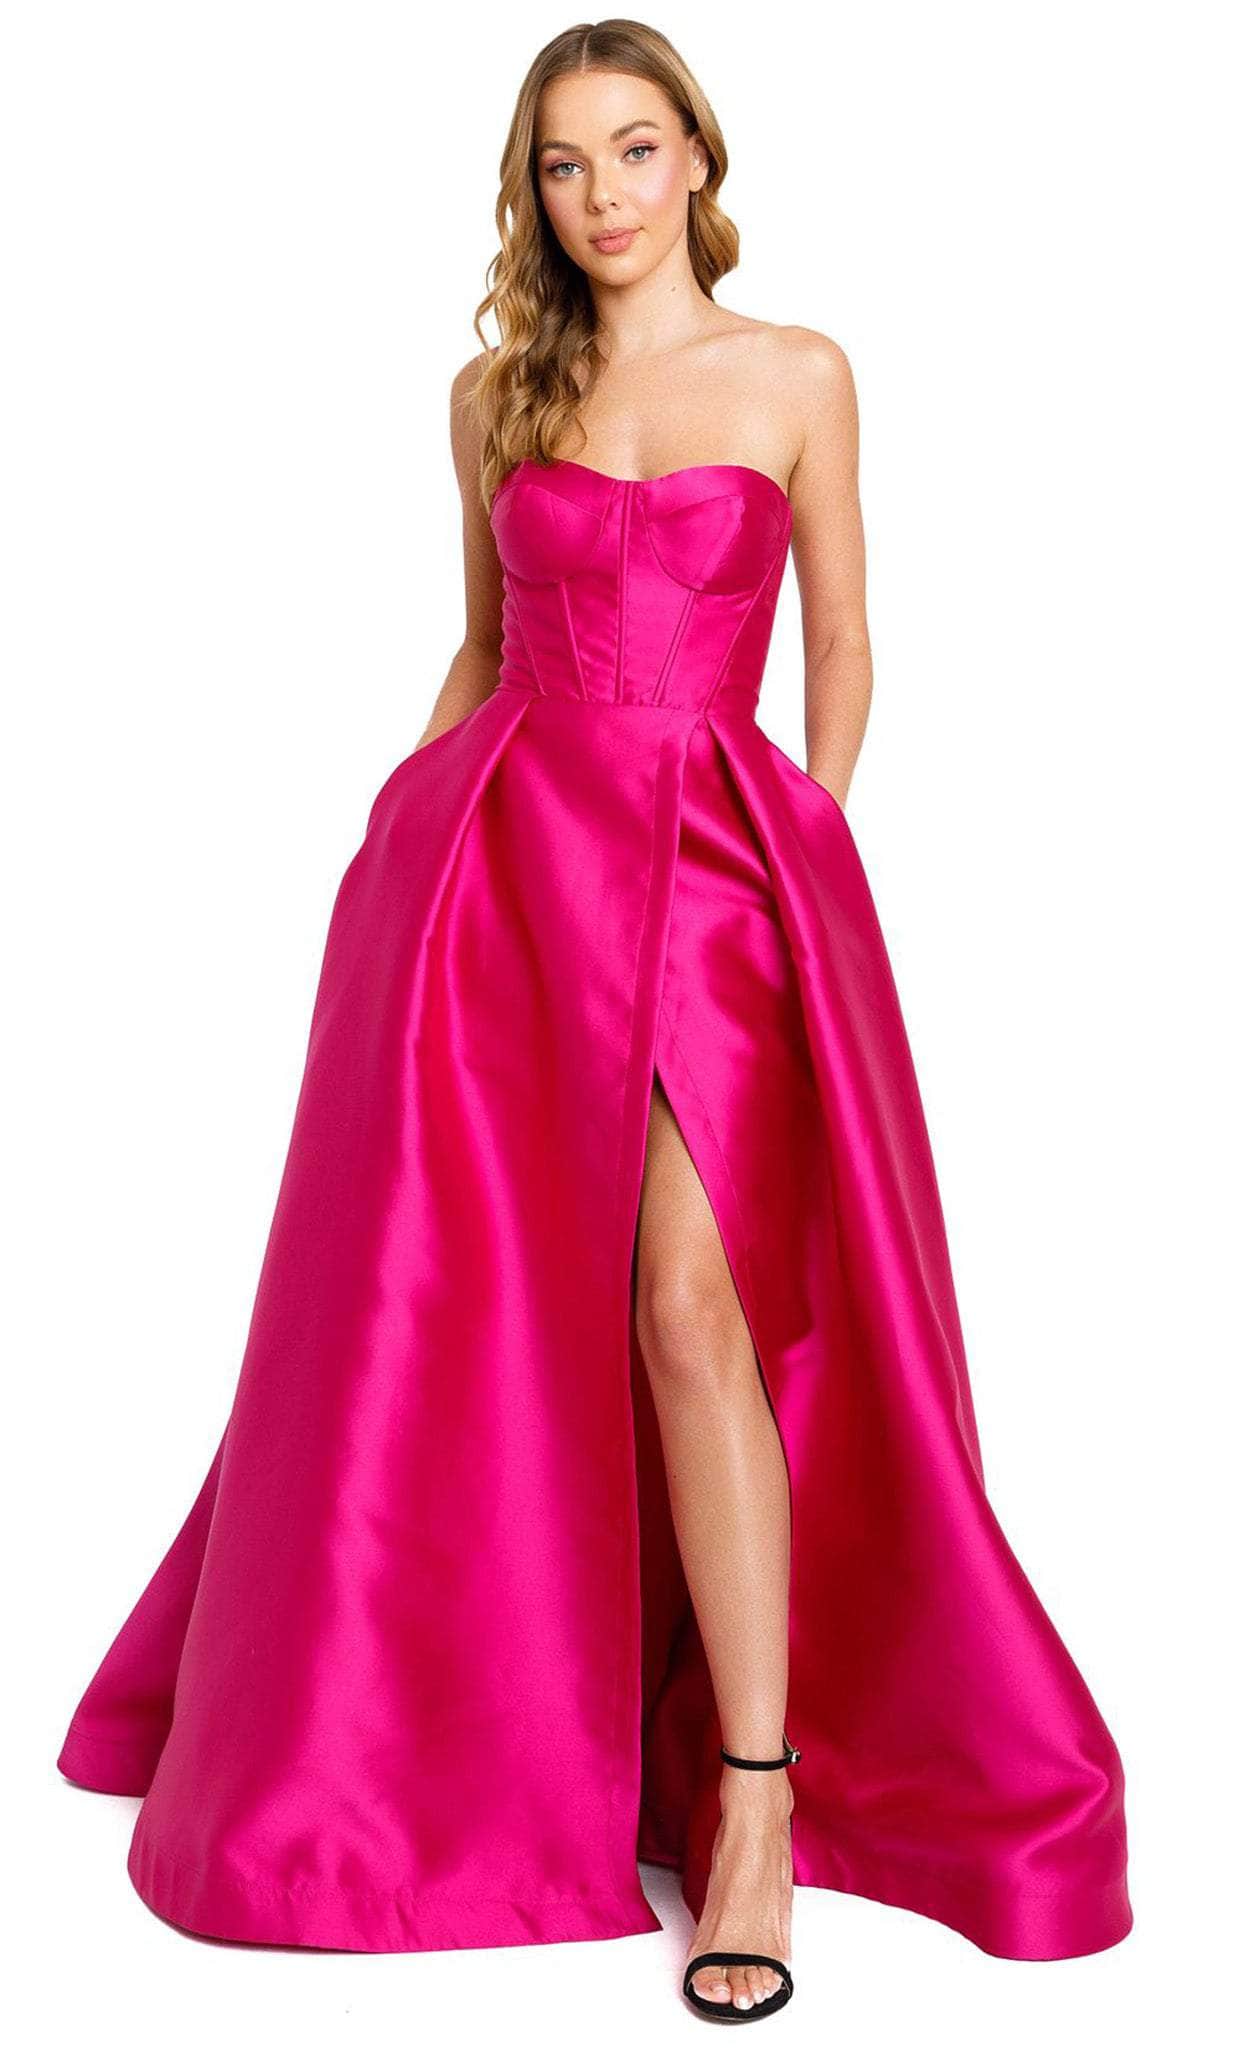 Nicole Bakti 7212 - Strapless Fitted A-line Prom Dress Special Occasion Dress